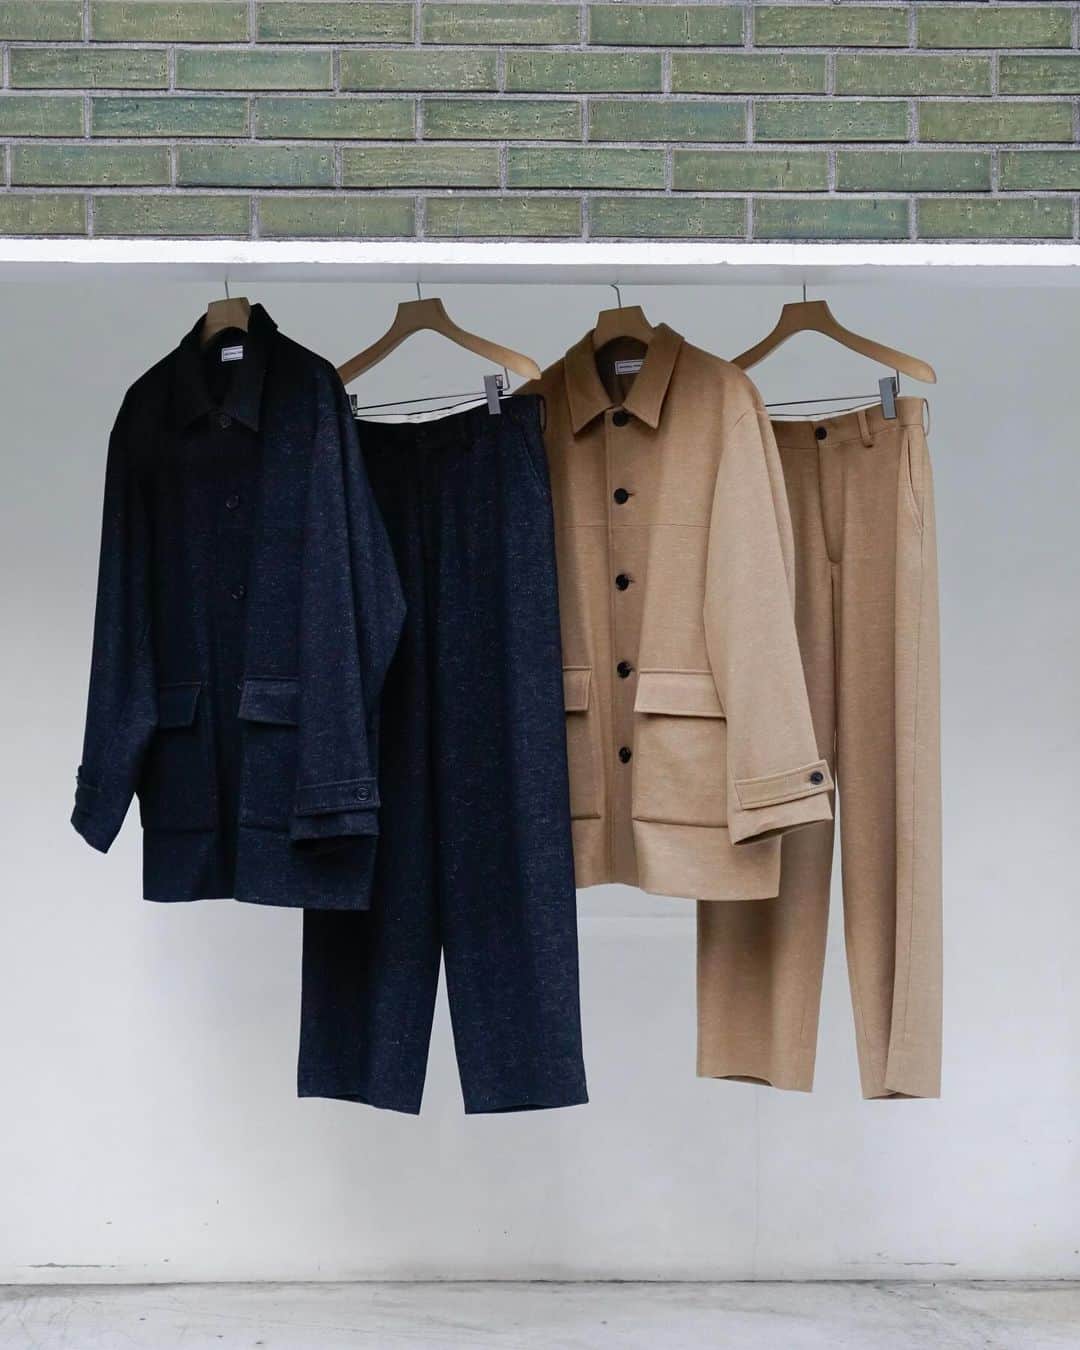 1LDKのインスタグラム：「〈 UNIVERSAL PRODUCTS. 〉 ⁡  "OPEN COLLAR HALF COAT" COL: BLACK / CAMEL SIZE: 2 / 3 ¥52,800 TAX IN   "WIDE TROUSERS" COL: BLACK / CAMEL SIZE: 1 / 2 / 3 ¥39,600 TAX IN⁡ ⁡ 着用詳細 Page2: 181cm / 上下共にSIZE3 Page3: 180cm / SIZE3 Page4: 166cm / SIZE2 ⁡ 取扱店舗 1LDK ( @1ldk_nakameguro ) 1LDK AOYAMA ( @1ldk_aoyama )  1LDK ONLINE STORE  ※ 1LDK AOYAMAはOPEN COLLAR HALF COATのみお取り扱いがございます。 ⁡ #universalproducts @universal__products #1ldk #1ldkaoyama #1ldkshopofficial」